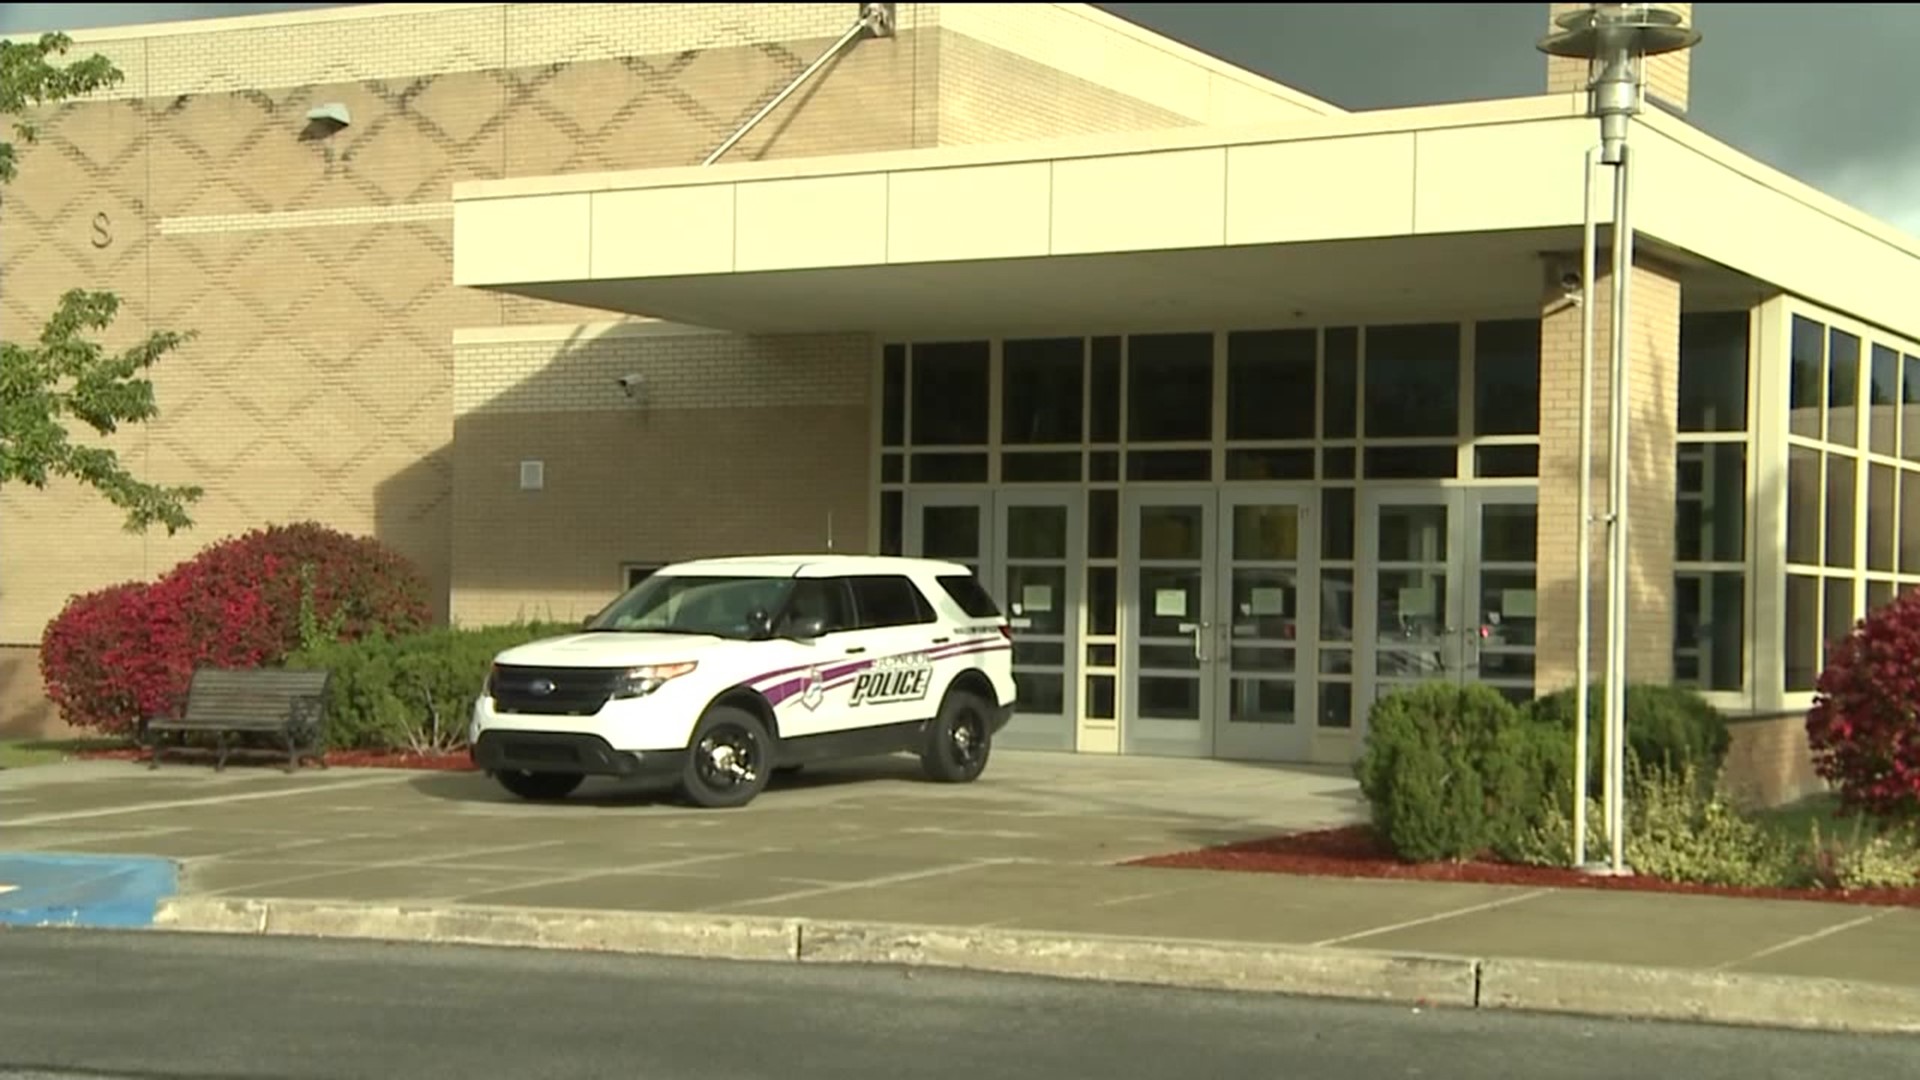 Officials at the Wallenpaupack Area School District say an investigation showed the threat was unfounded.